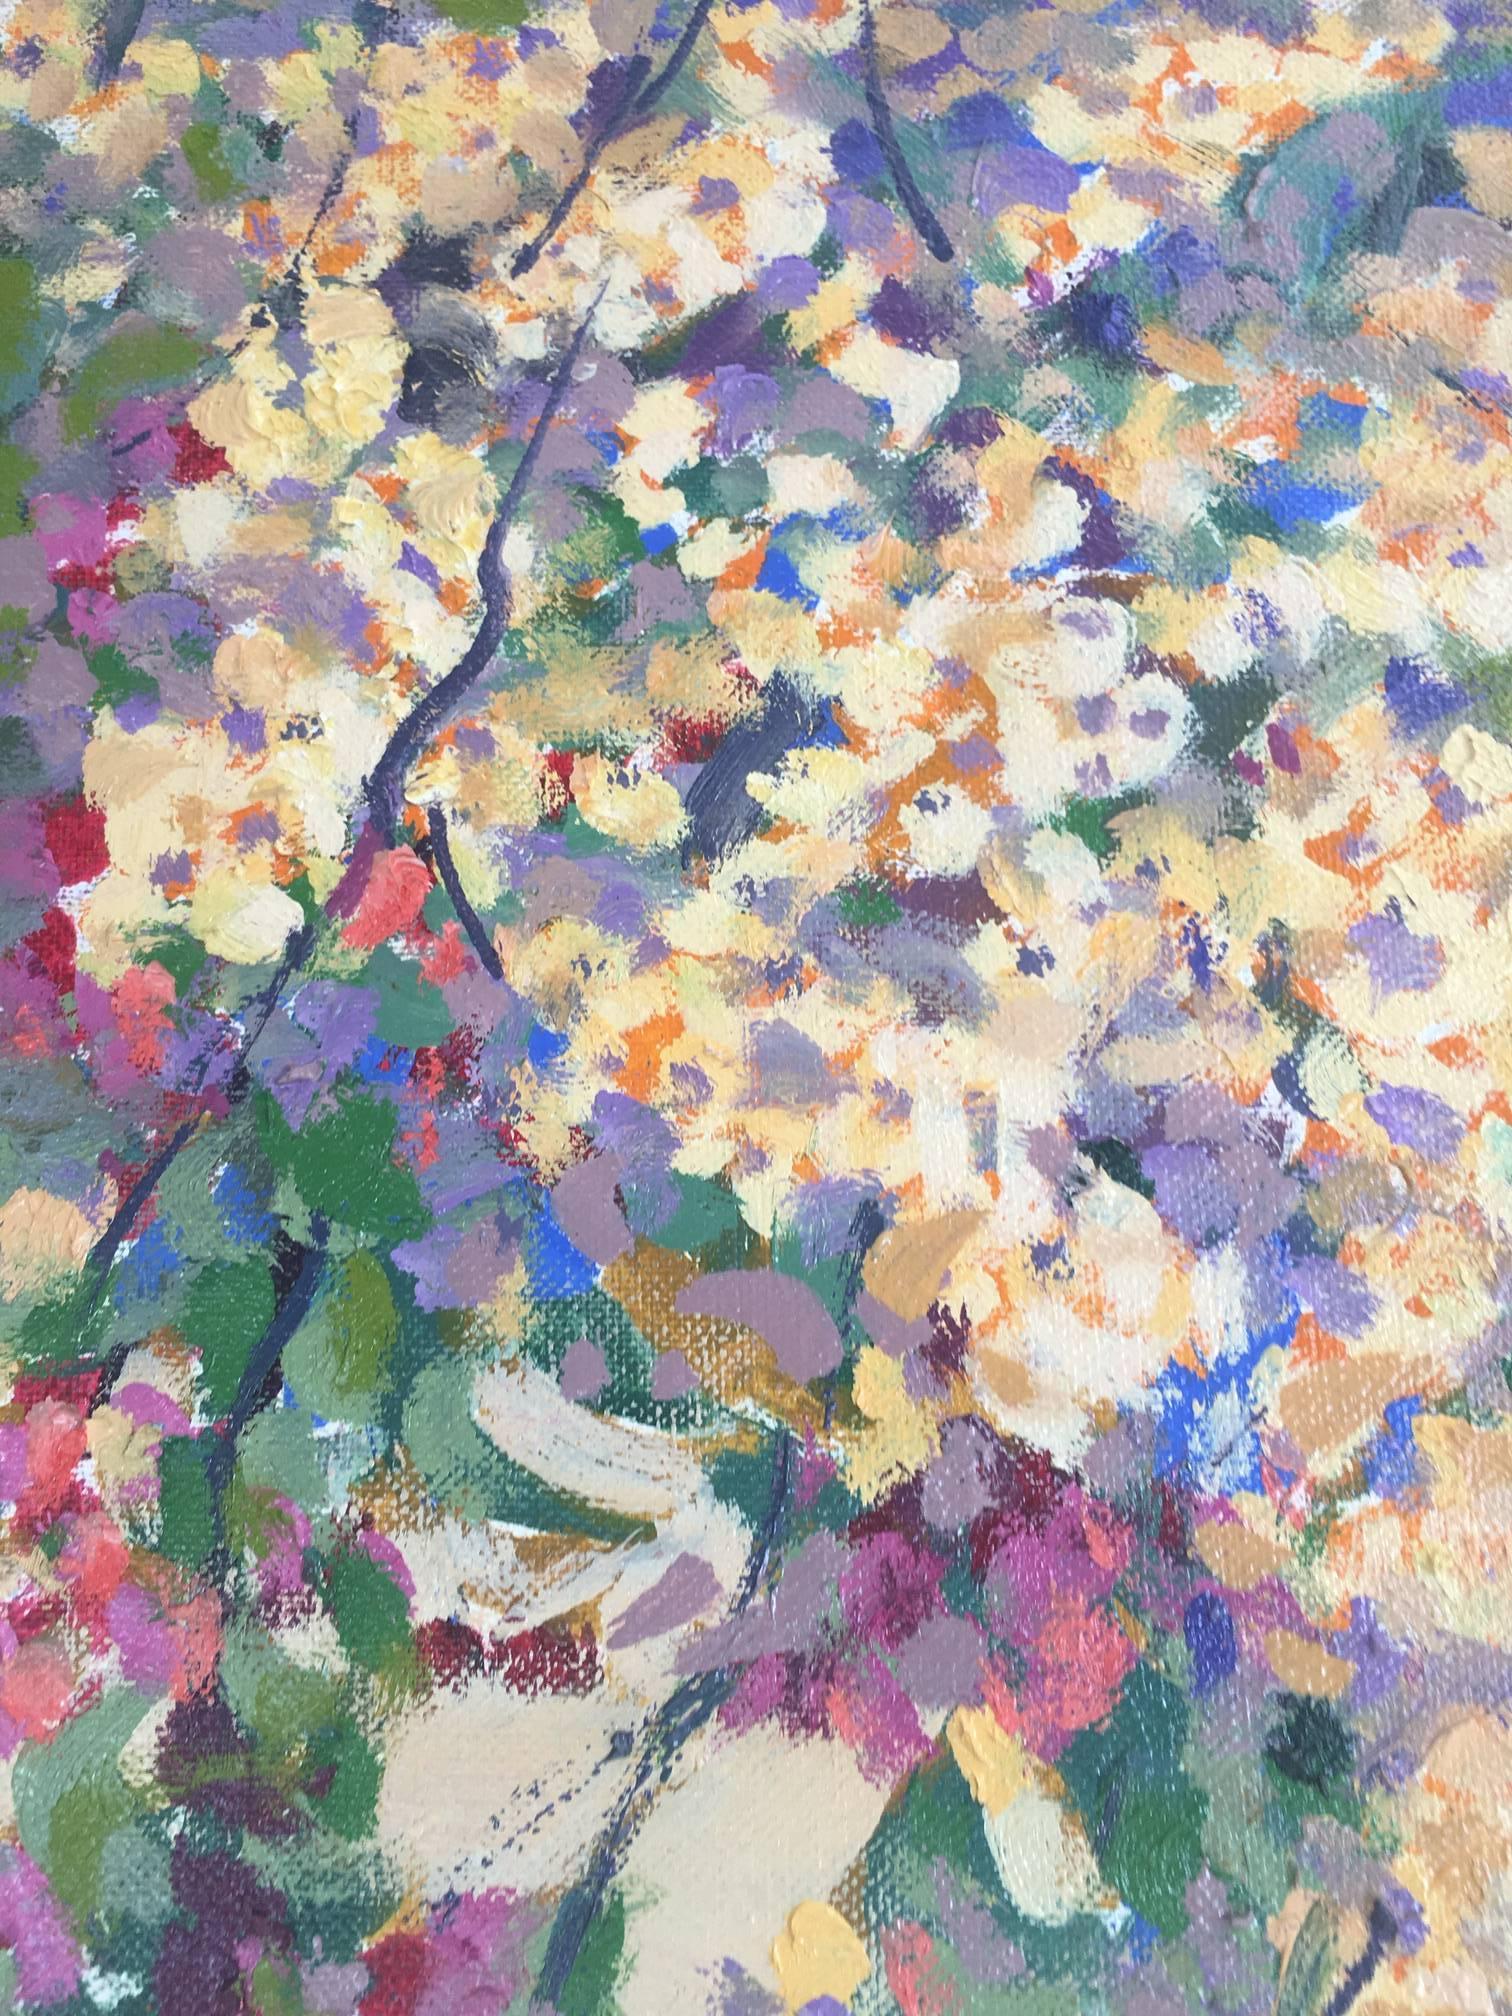 Copons  PARK CIUTADELLA Barcelona Flower Park original acrylic  - Expressionist Painting by Joan Copons